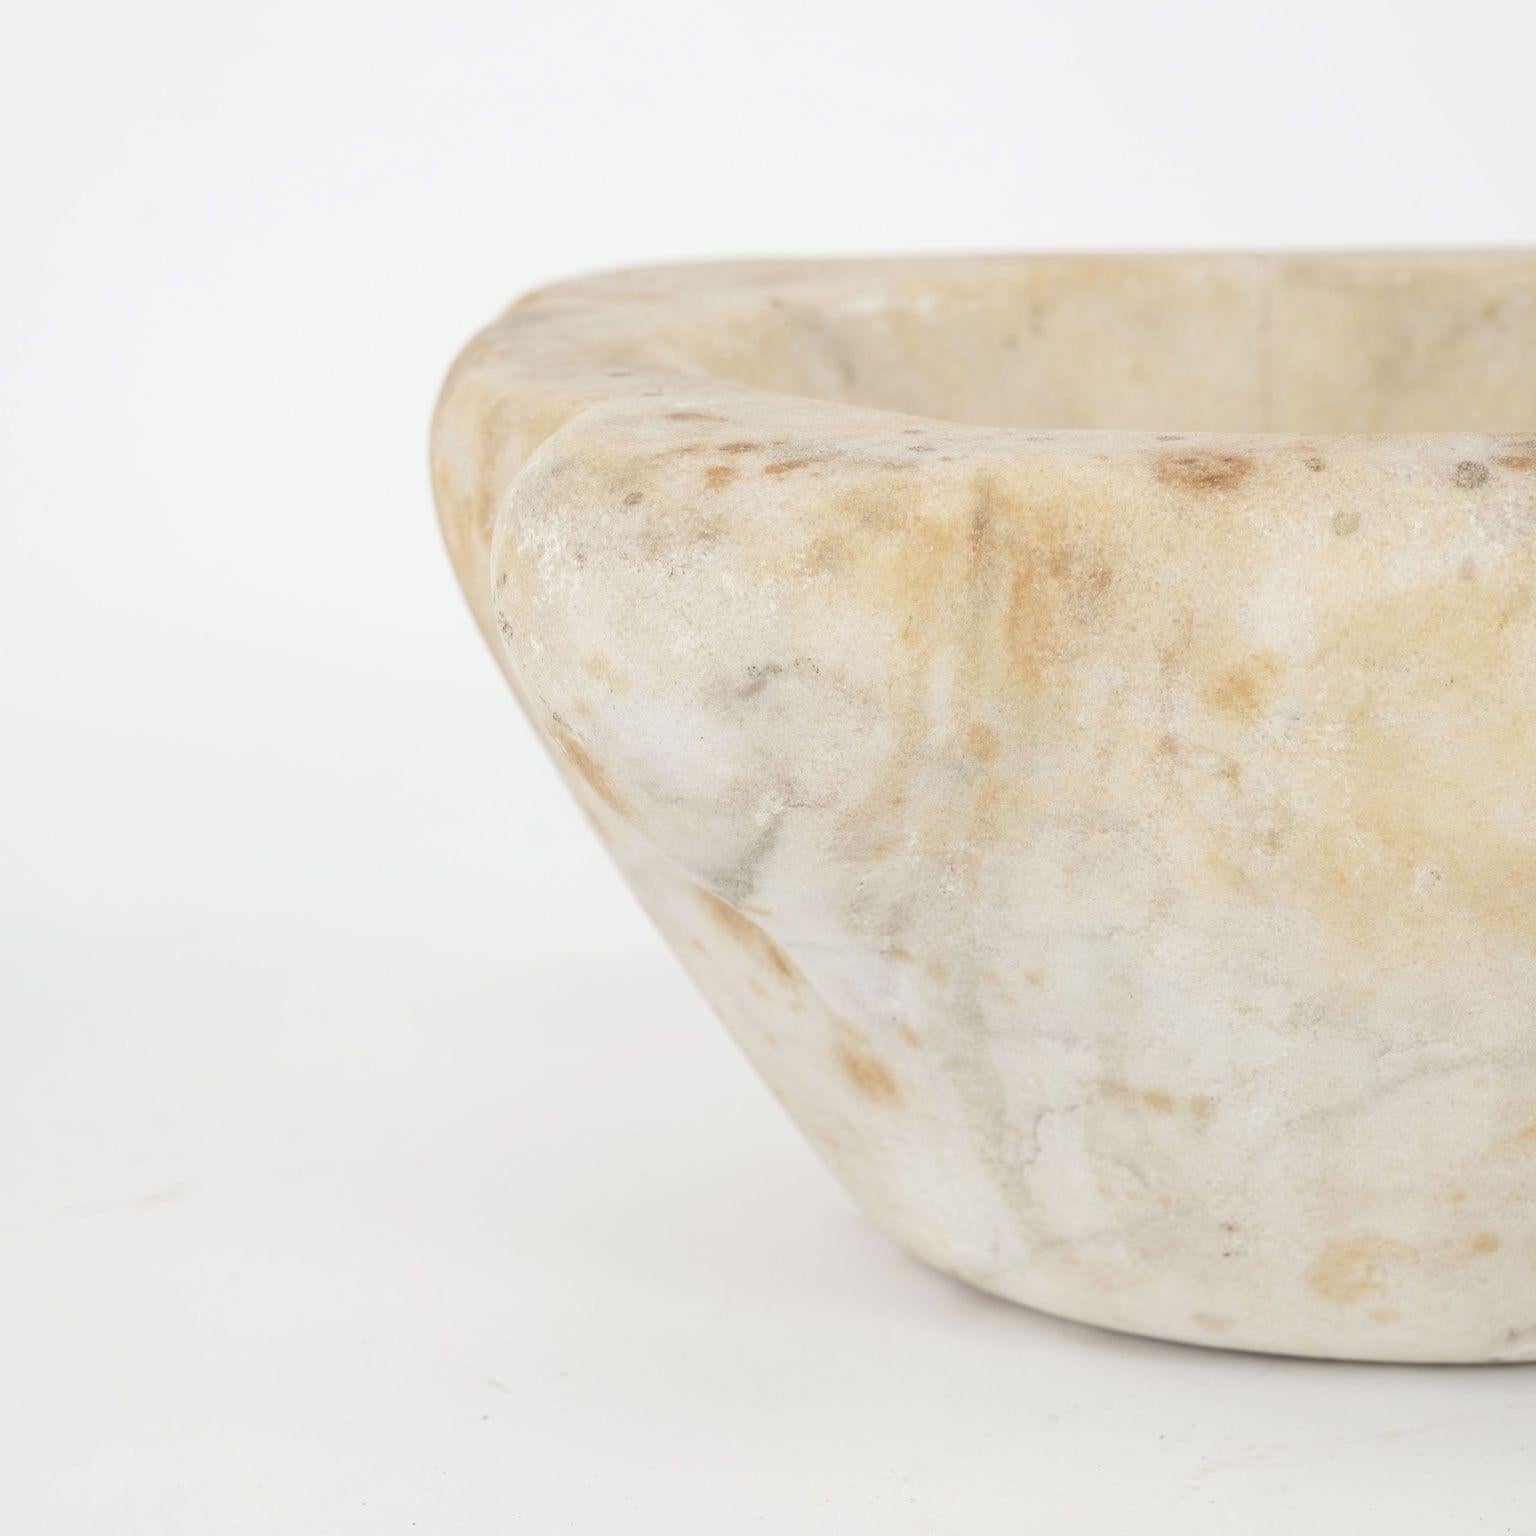 19th century stone mortar from France. Hand-carved alabaster mortar in a conical shape with four handles. One handle notched with a channel for pouring. Beautiful as a sculptural accent piece or decorative bowl. Seven stone mortars of varying shapes